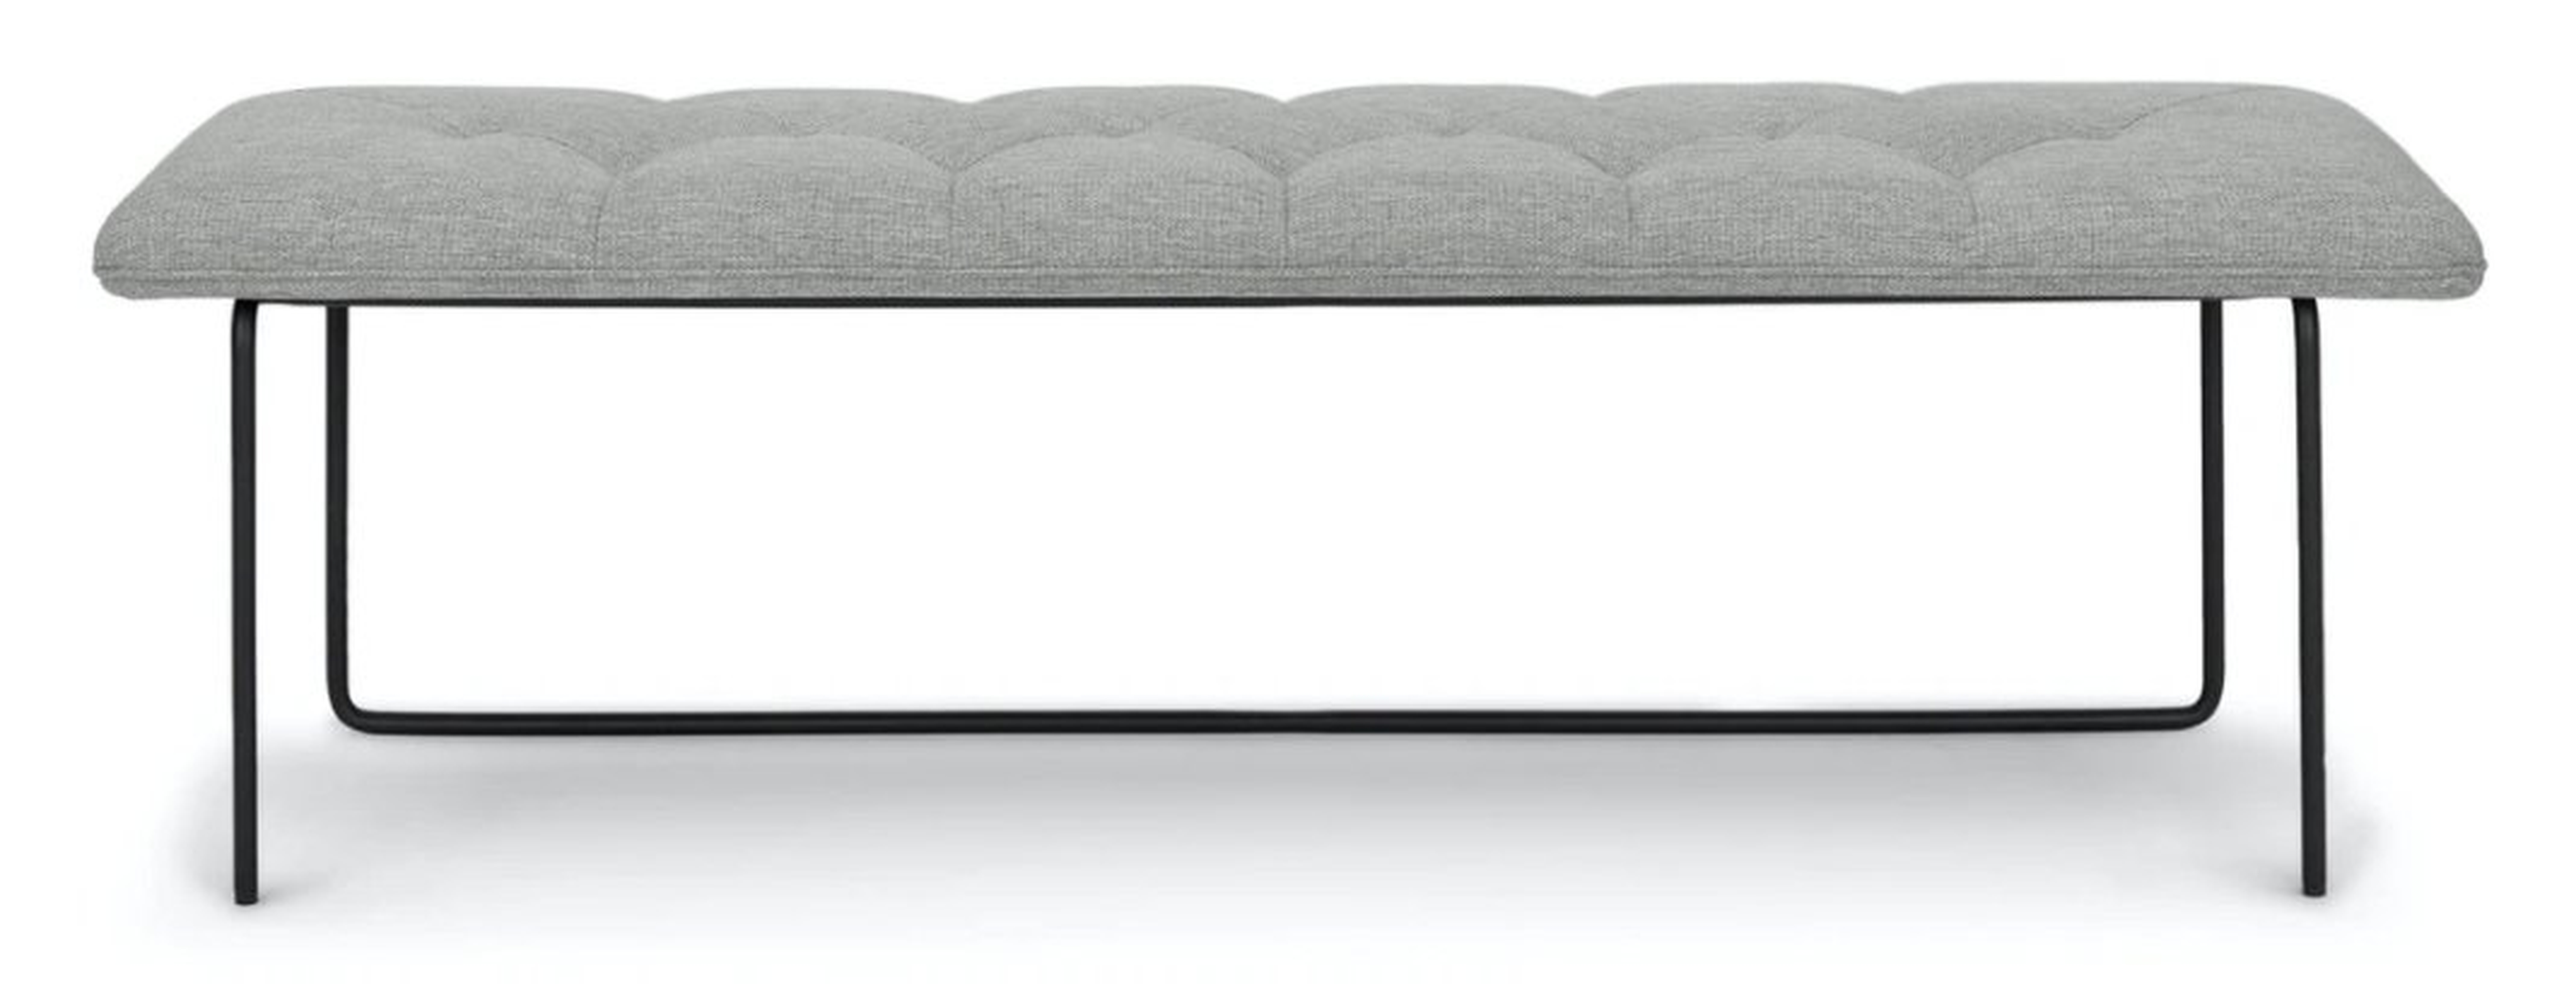 Level Winter Gray 61" Bench - Article